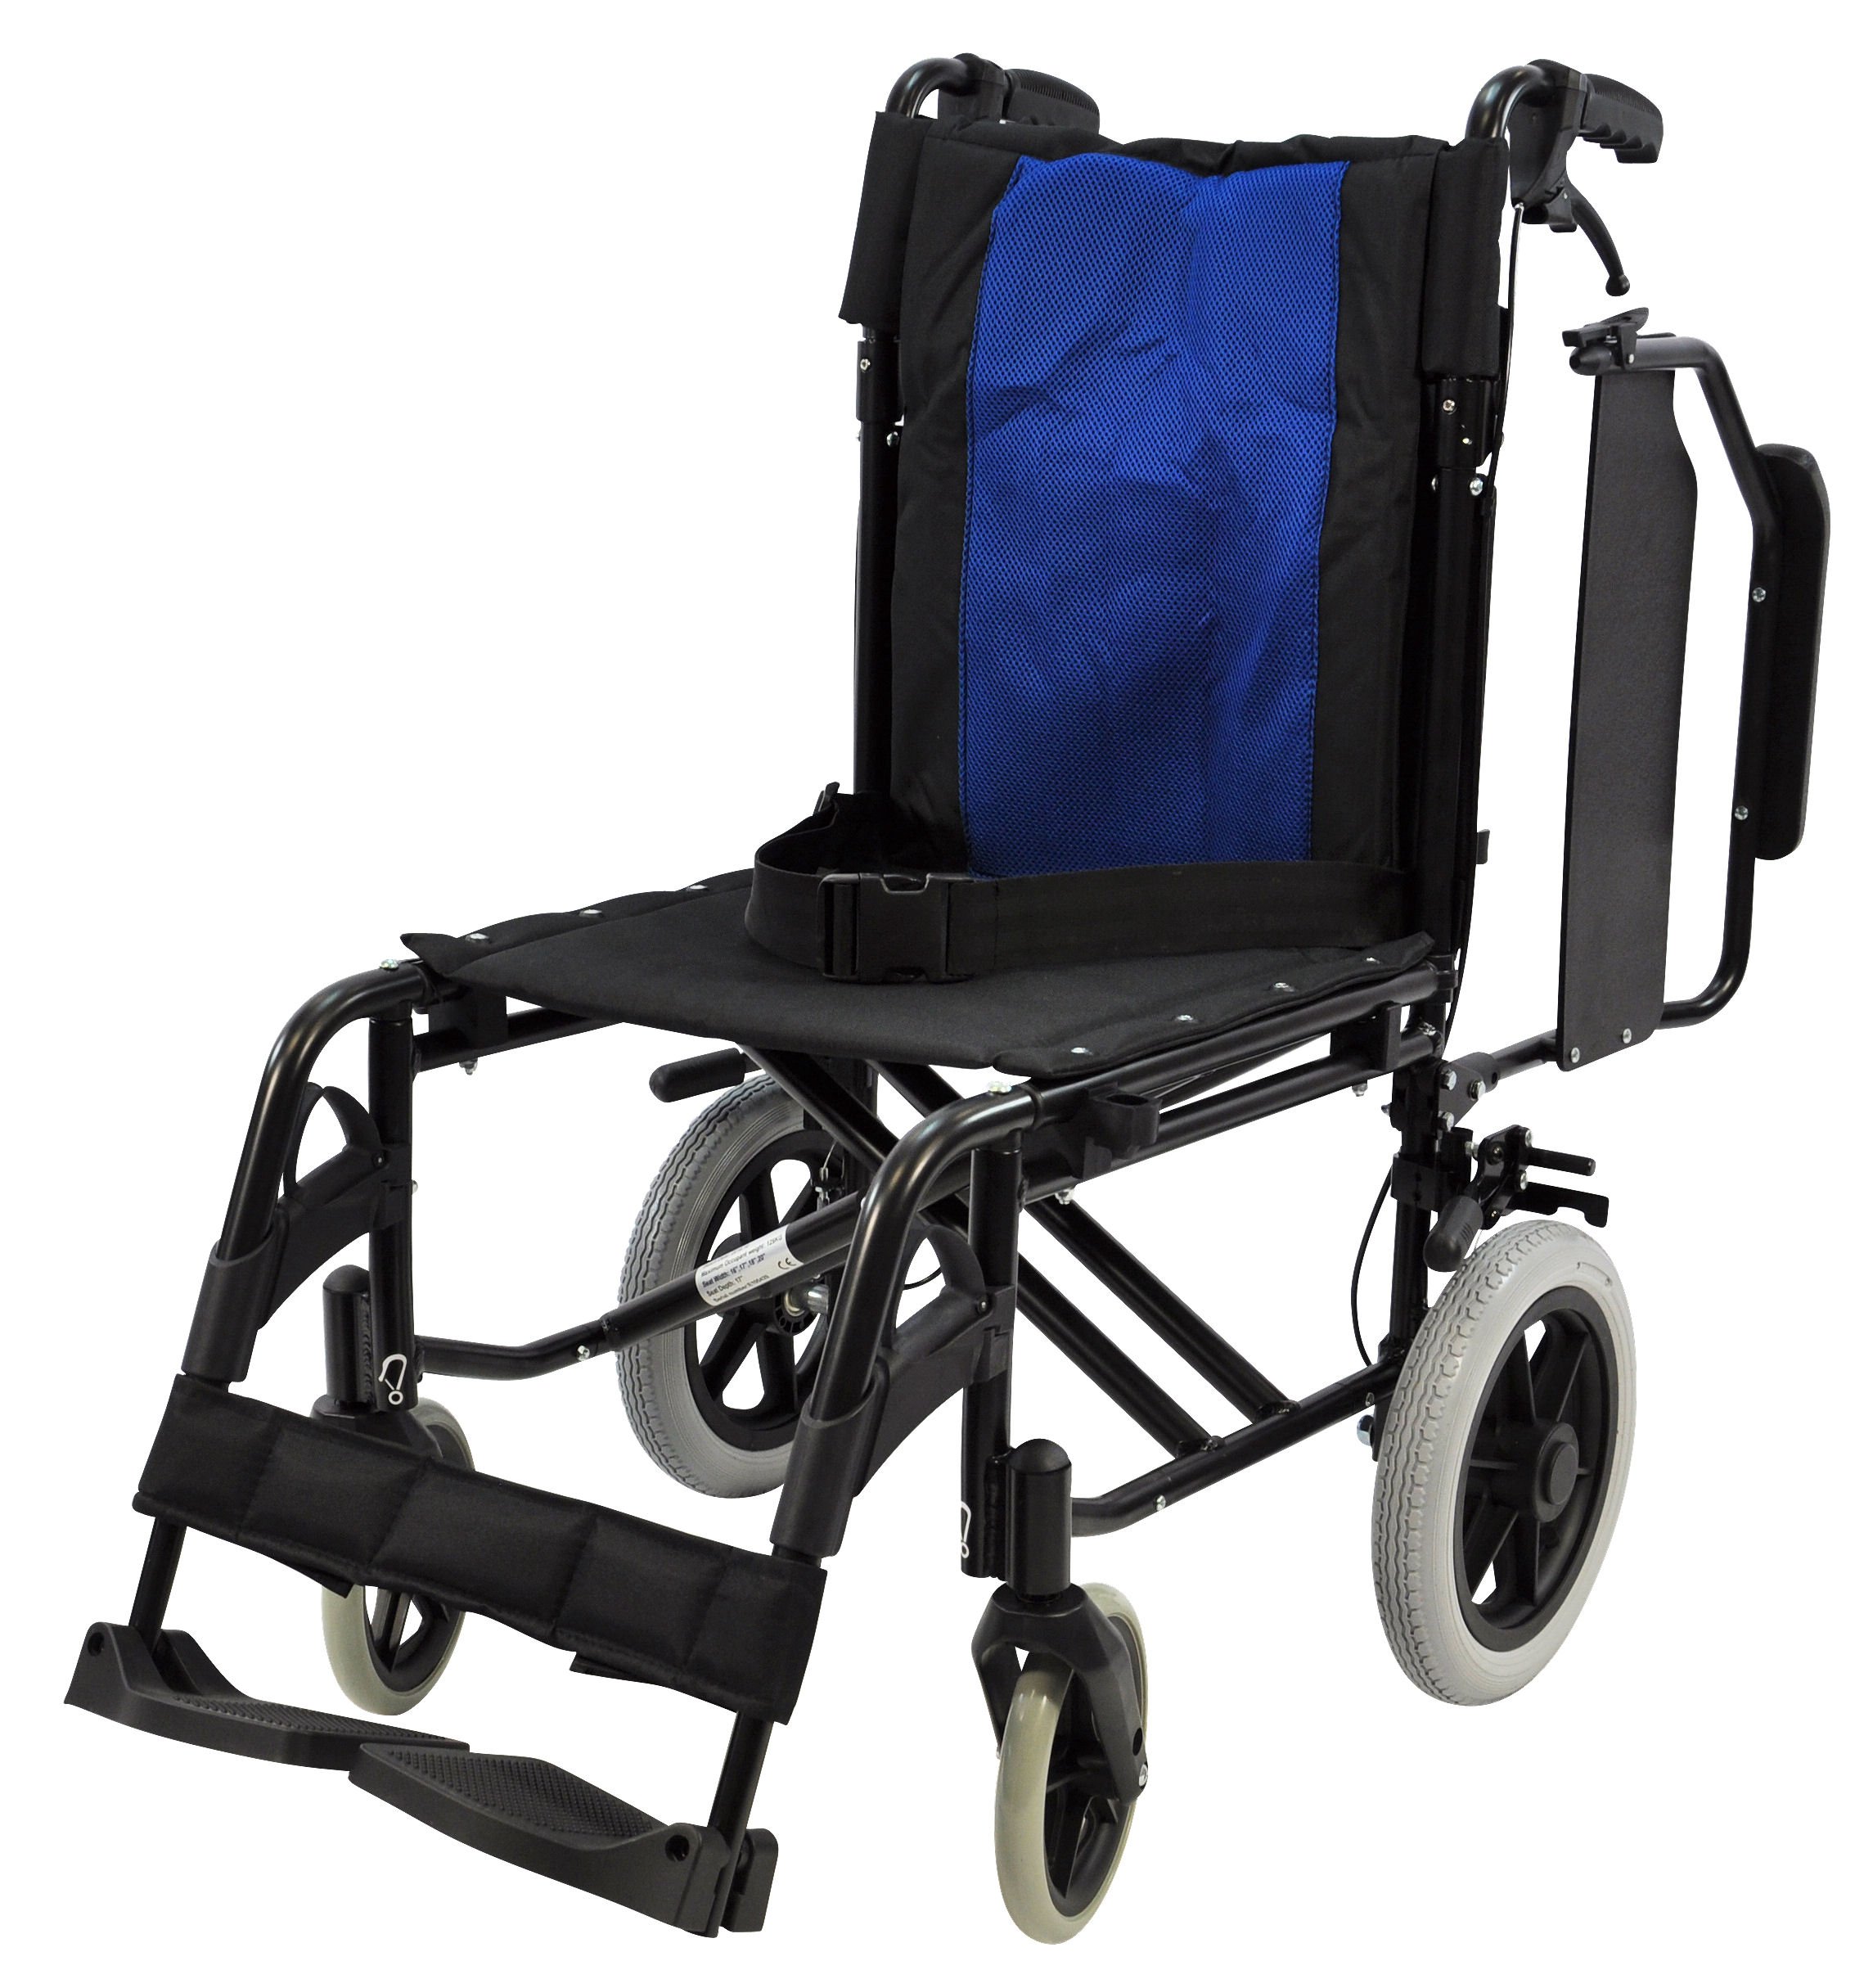 Greencare Easy 1 Attendant Wheelchair - Attendant Wheelchairs from